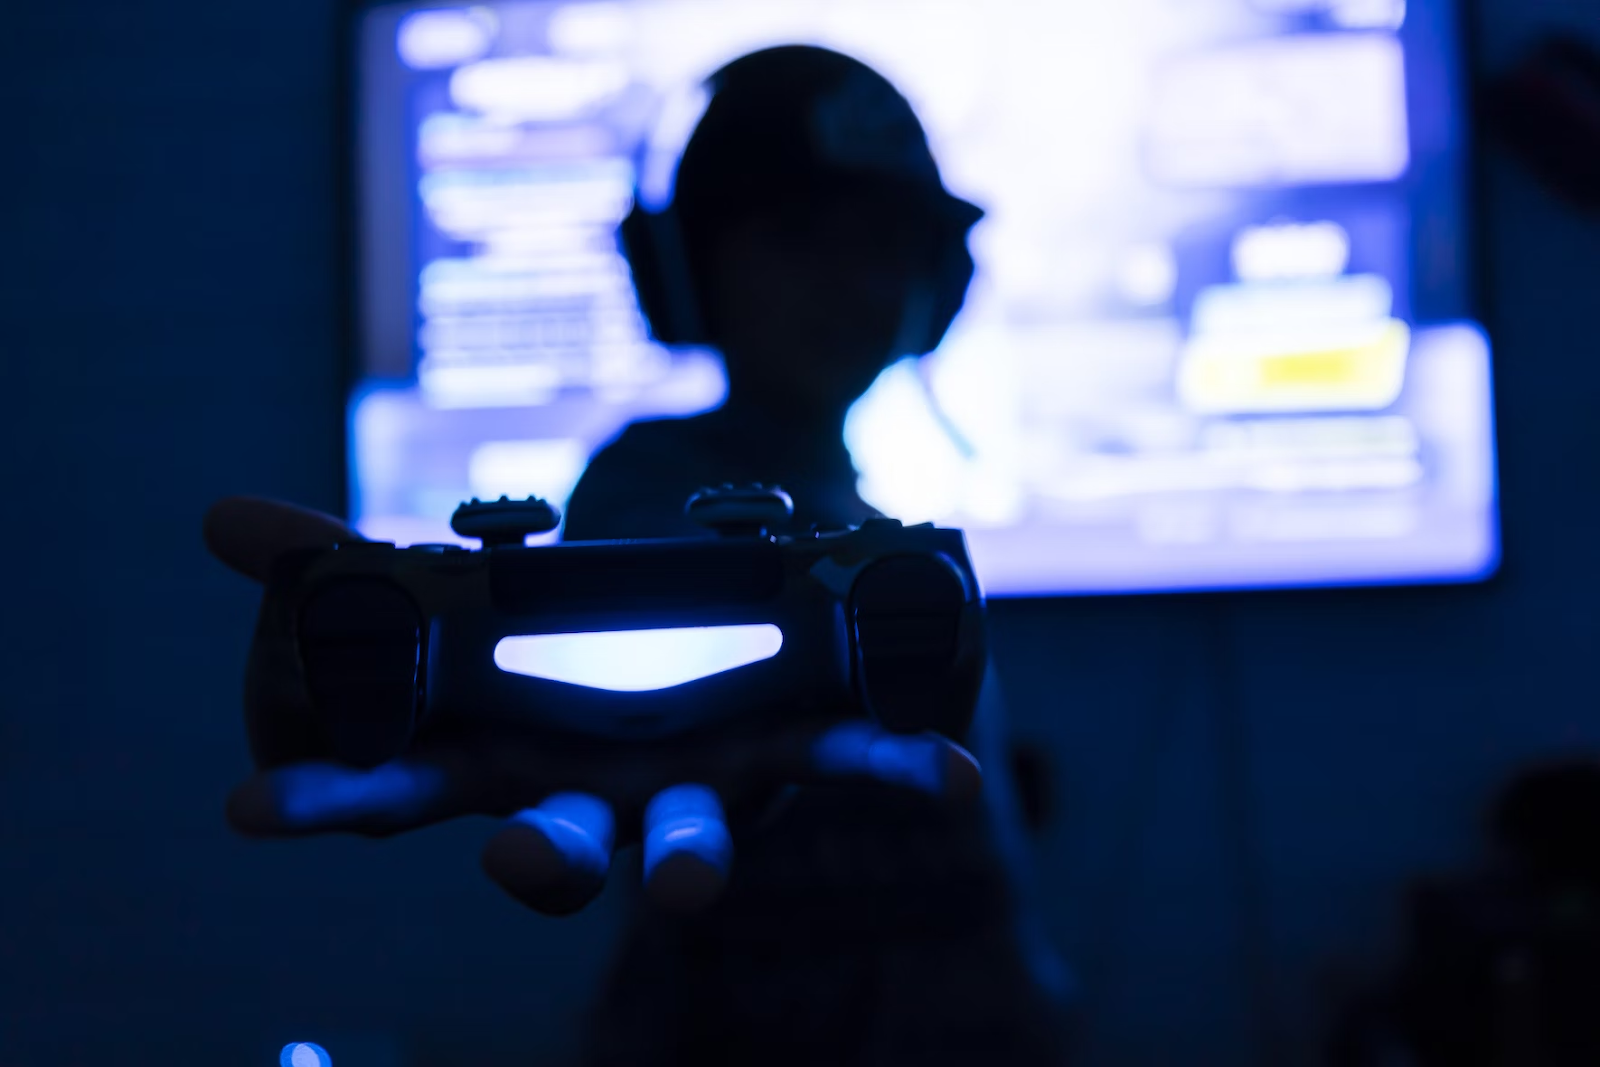 How Technology Empowers Safer Online Gaming Experiences